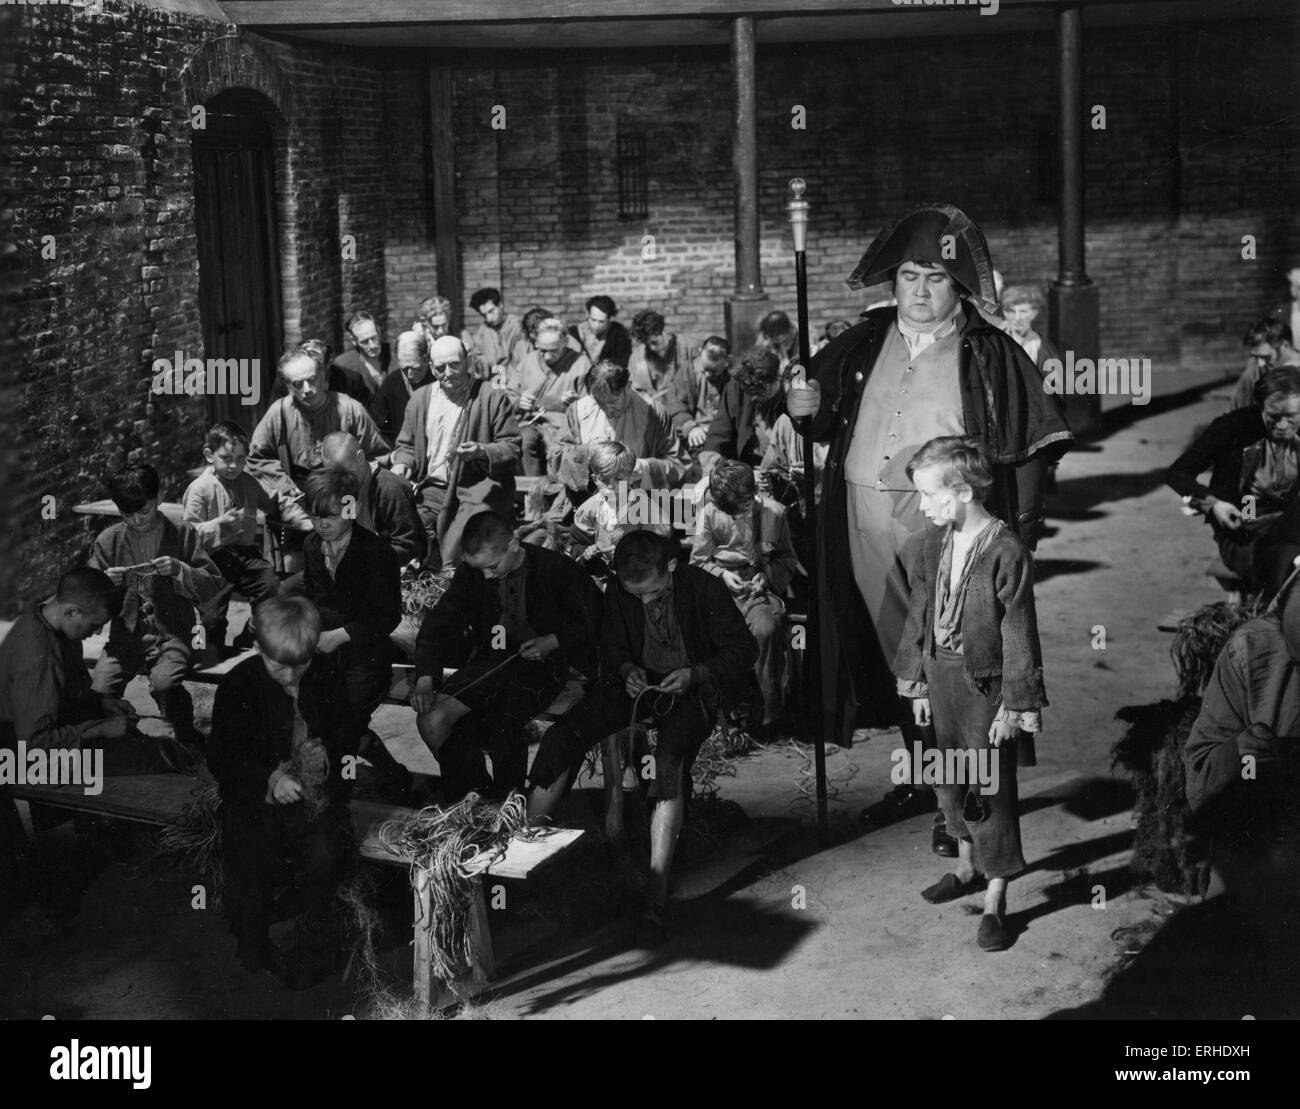 Oliver Twist film still from 1948 Rank Film production of Charles Dickens. British novelist, 7 February 1812 - 9 June 1870. With Robert Newton as Bill Sykes, Alec Guiness as Fagin, Kenneth Downy as Workhouse Master, John Howard Davies as Oliver. Directed by David Lean, Music by ARNOLD BAX. Stock Photo